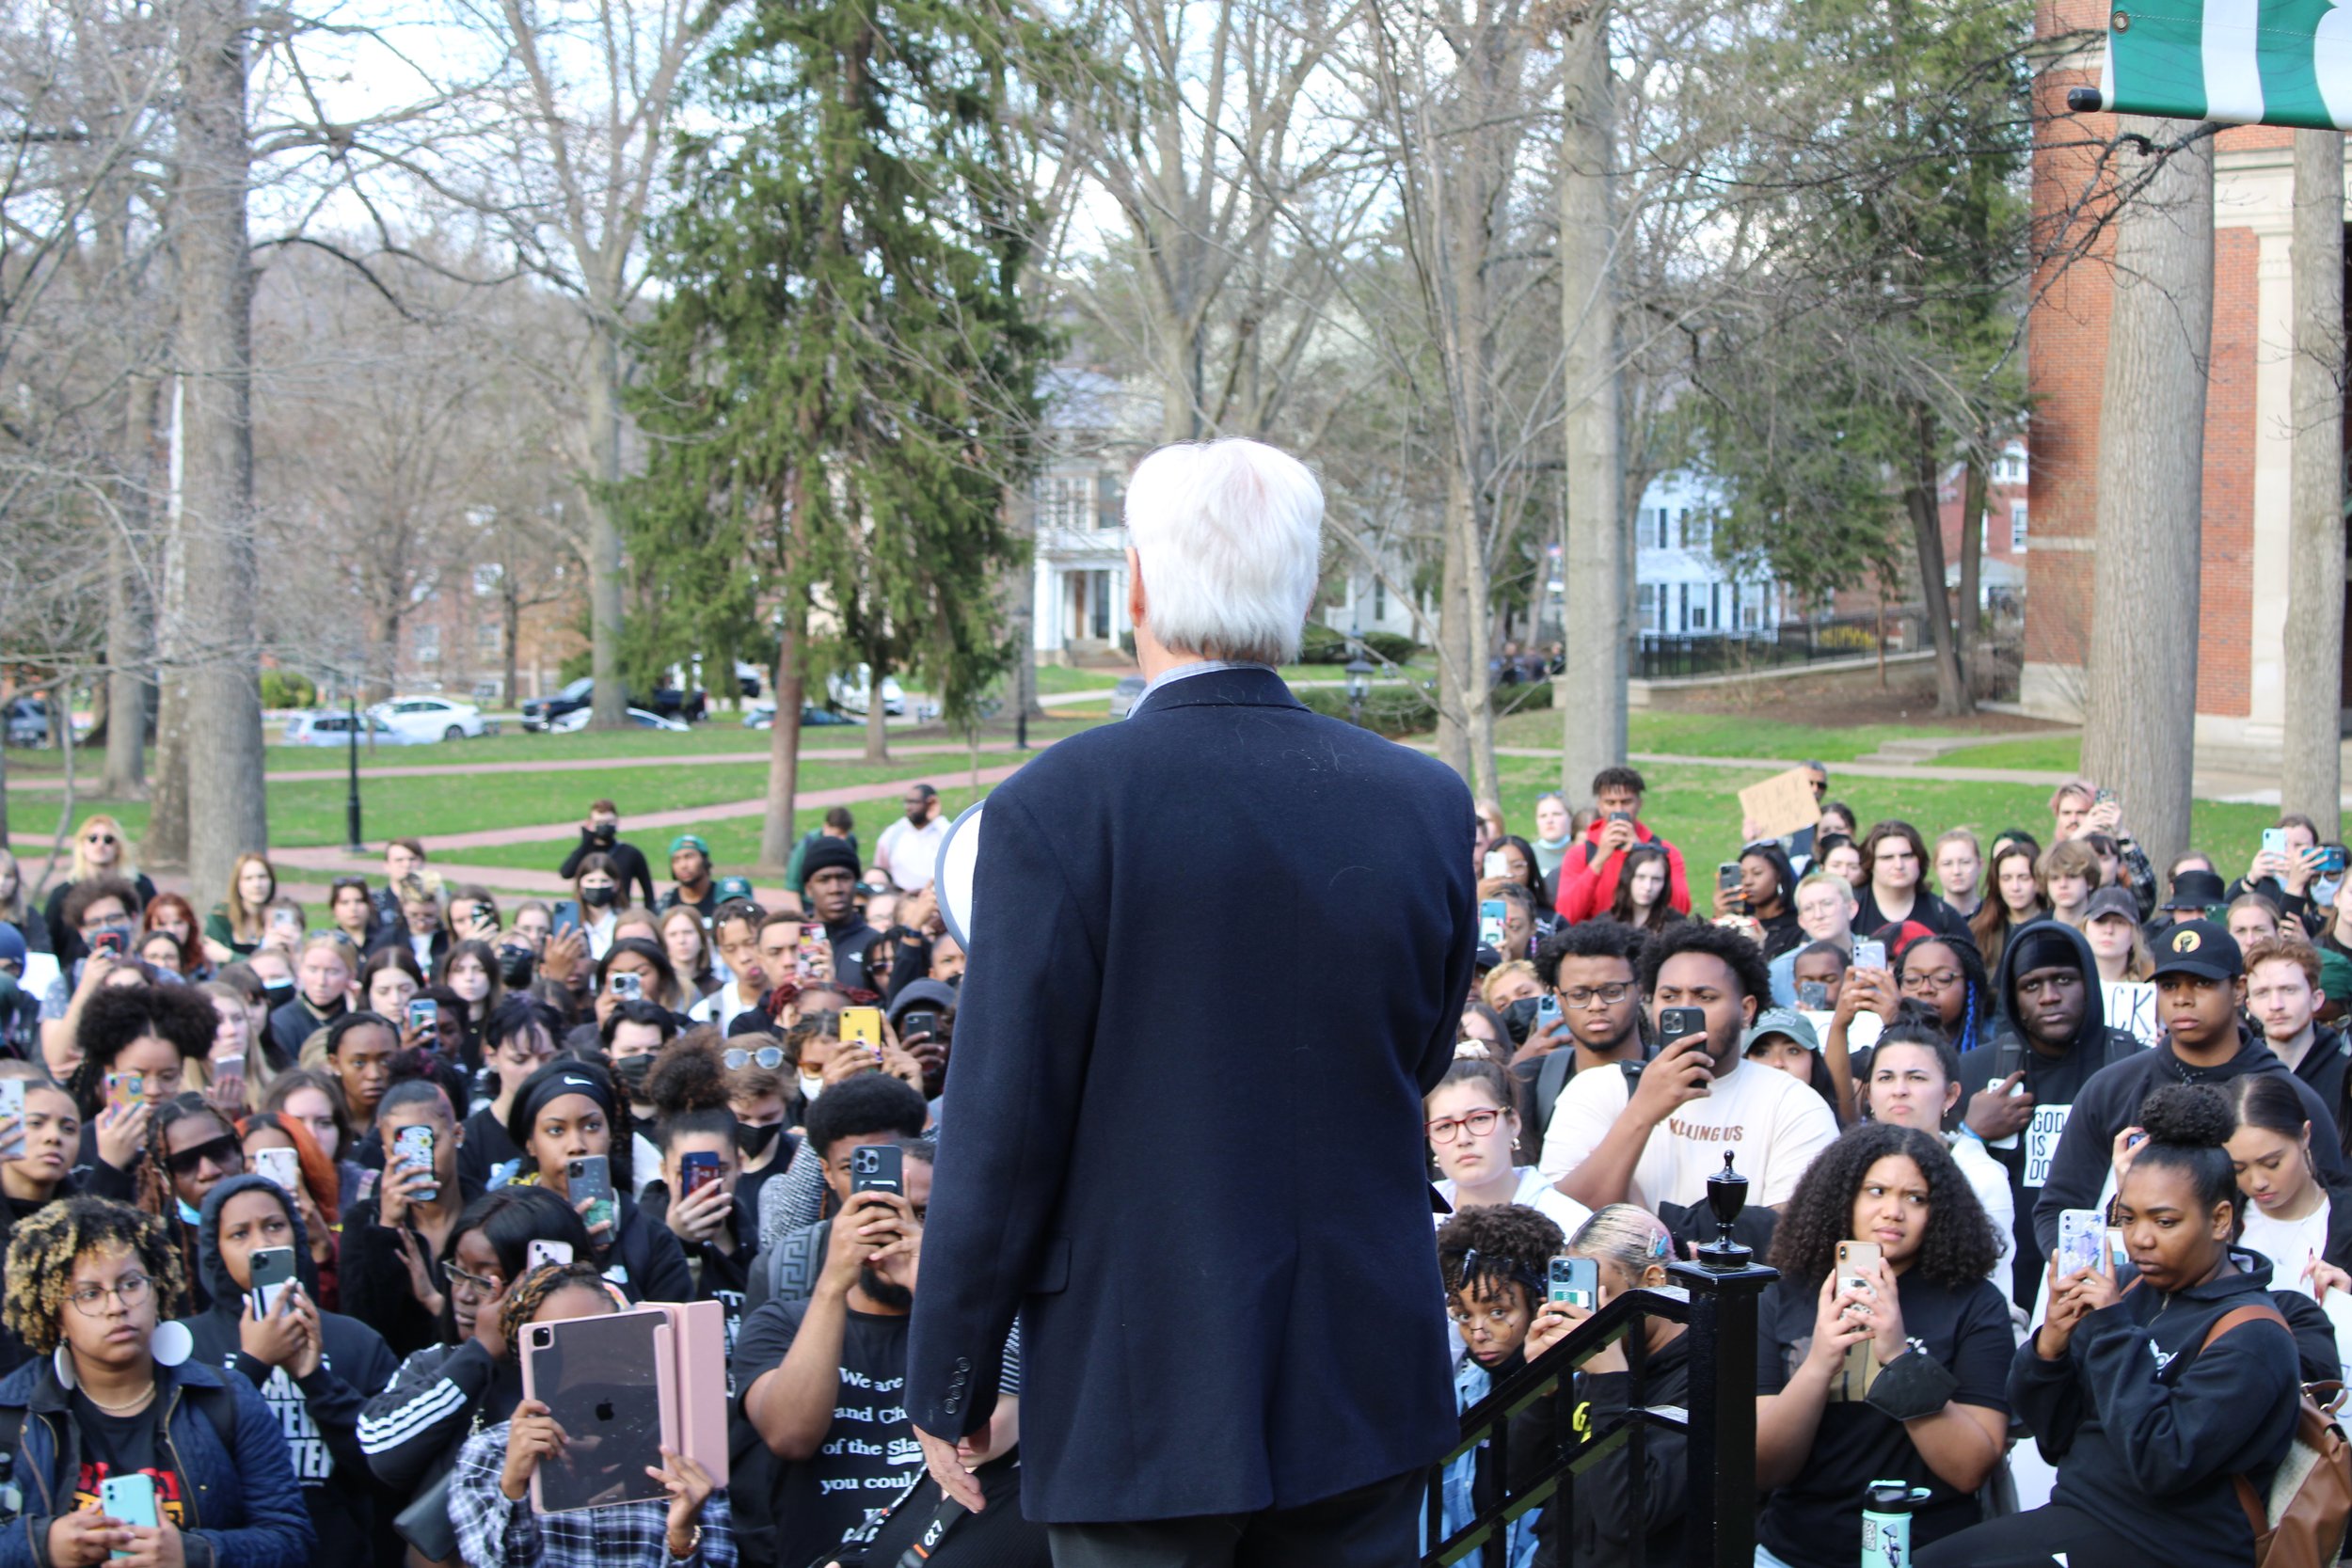  Sherman addresses claims made during the protest in a speech on the Cutler hall steps. Photo by Izzy Keller. 